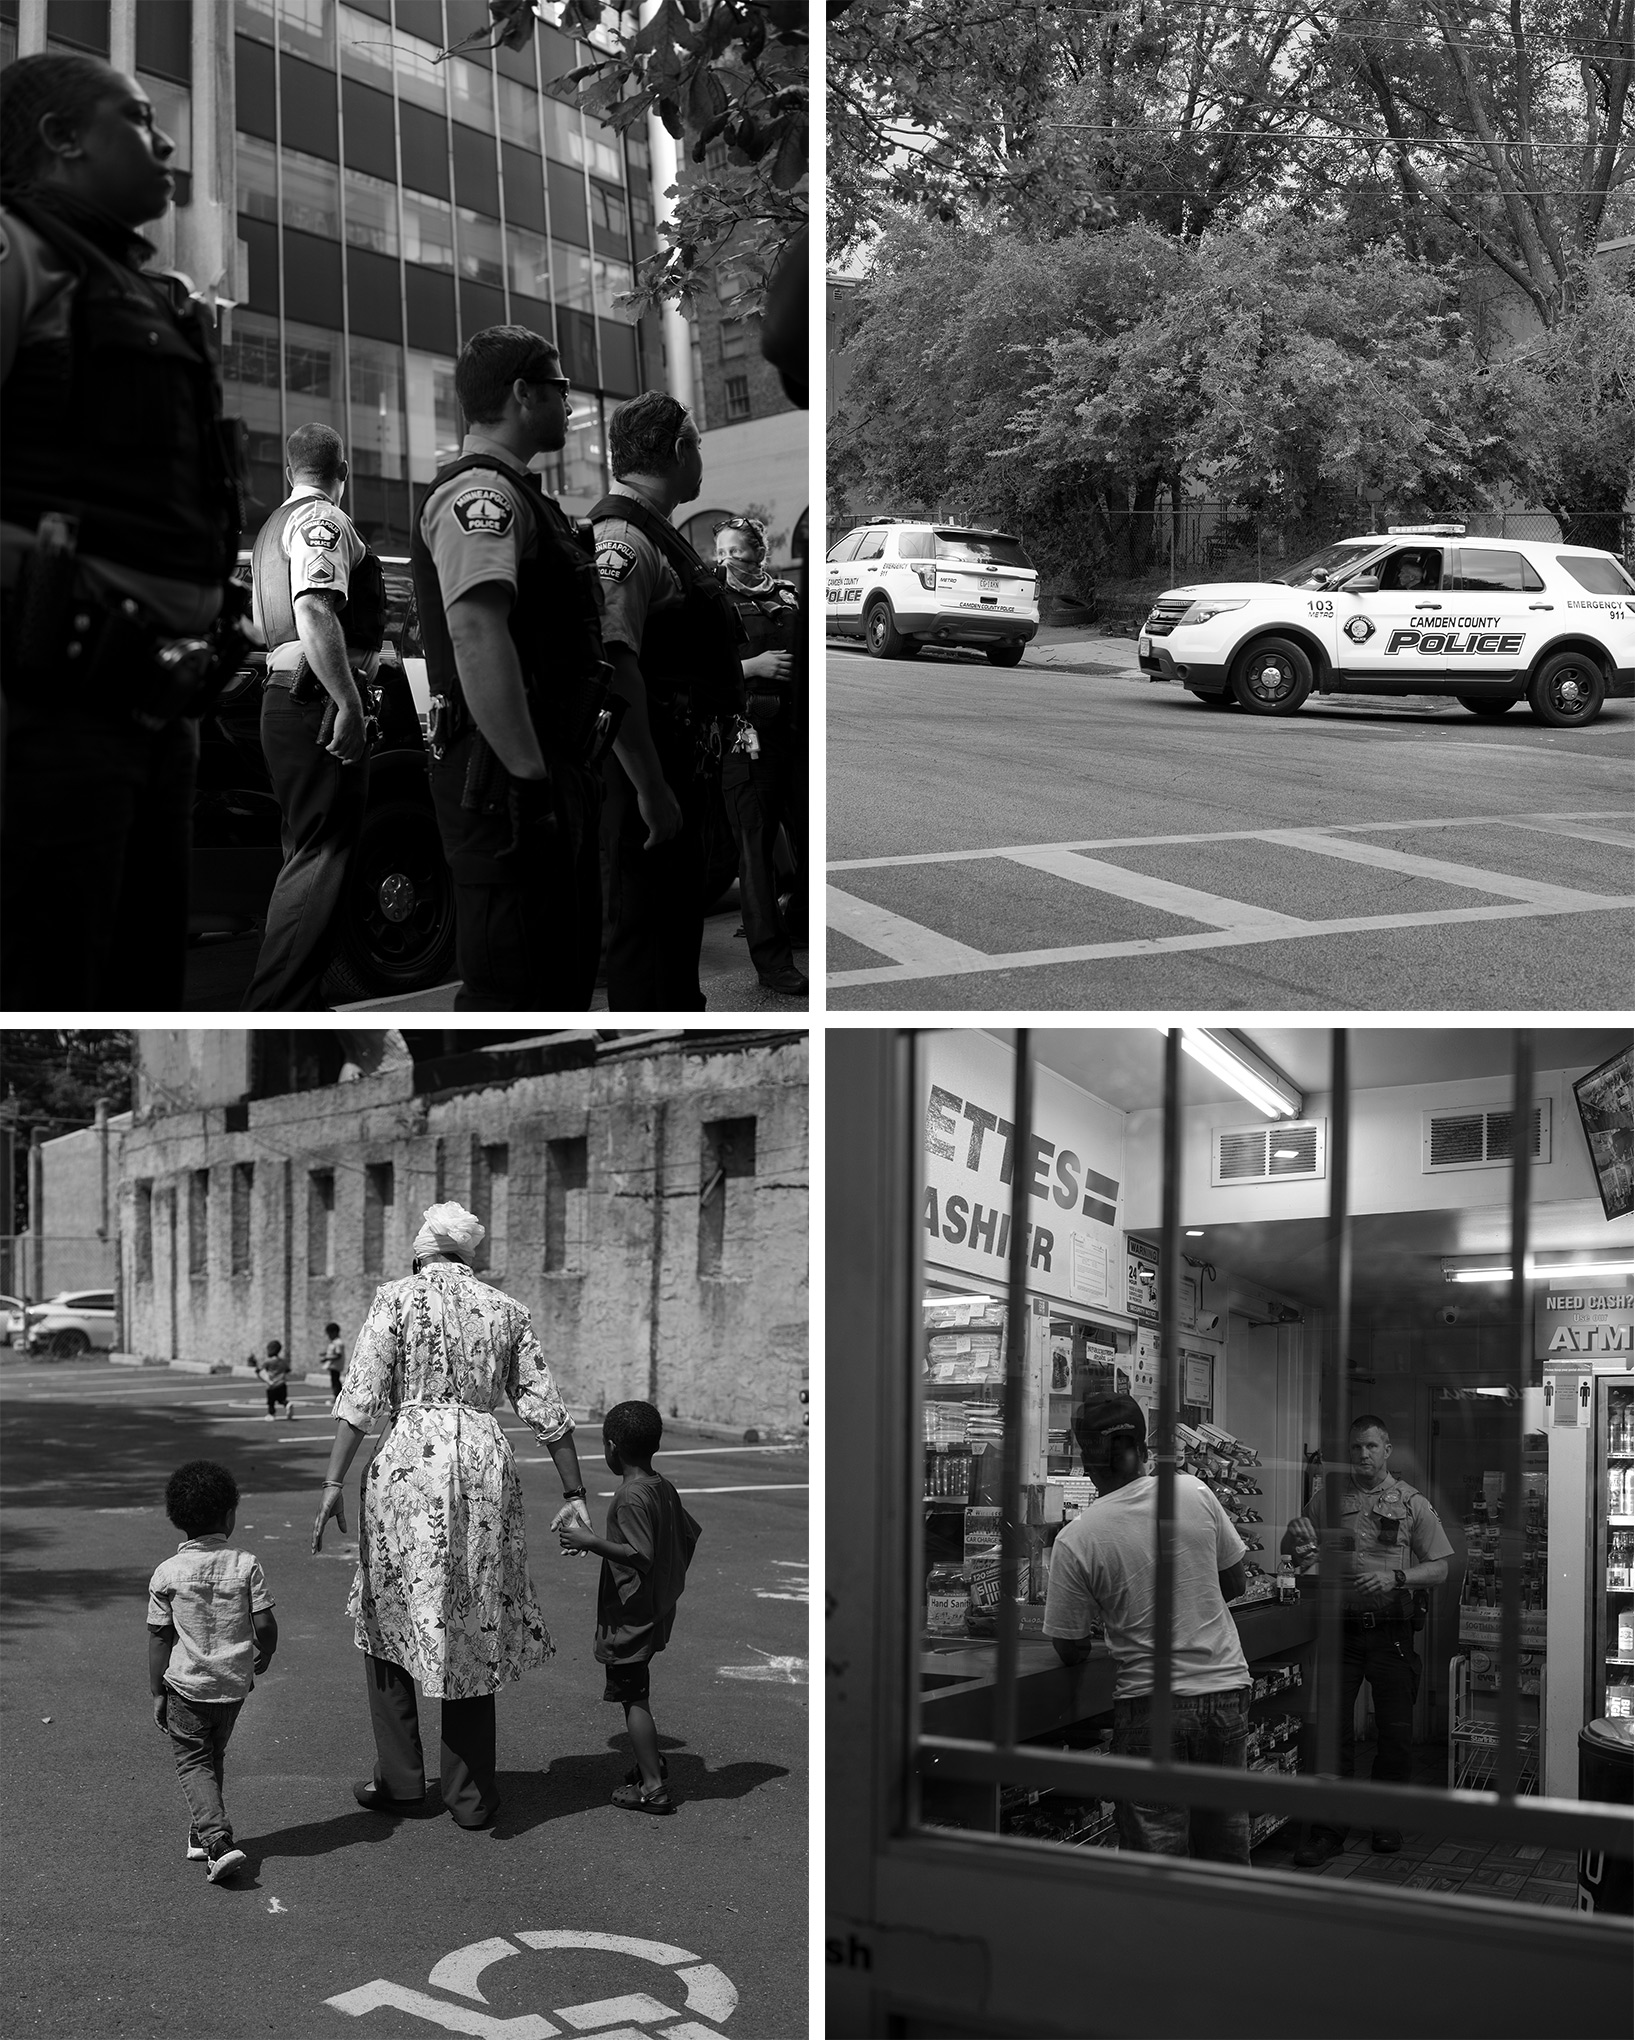 Clockwise from top left: Police officers in Minneapolis;  two Camden County, N.J., police vehicles; an officer at a Minneapolis gas station; and Sister Chabree Muhammad, with kids in Camden in July. (Photographs by Widline Cadet (Camden, N.J.) and Rahim Fortune (Minneapolis) for TIME)